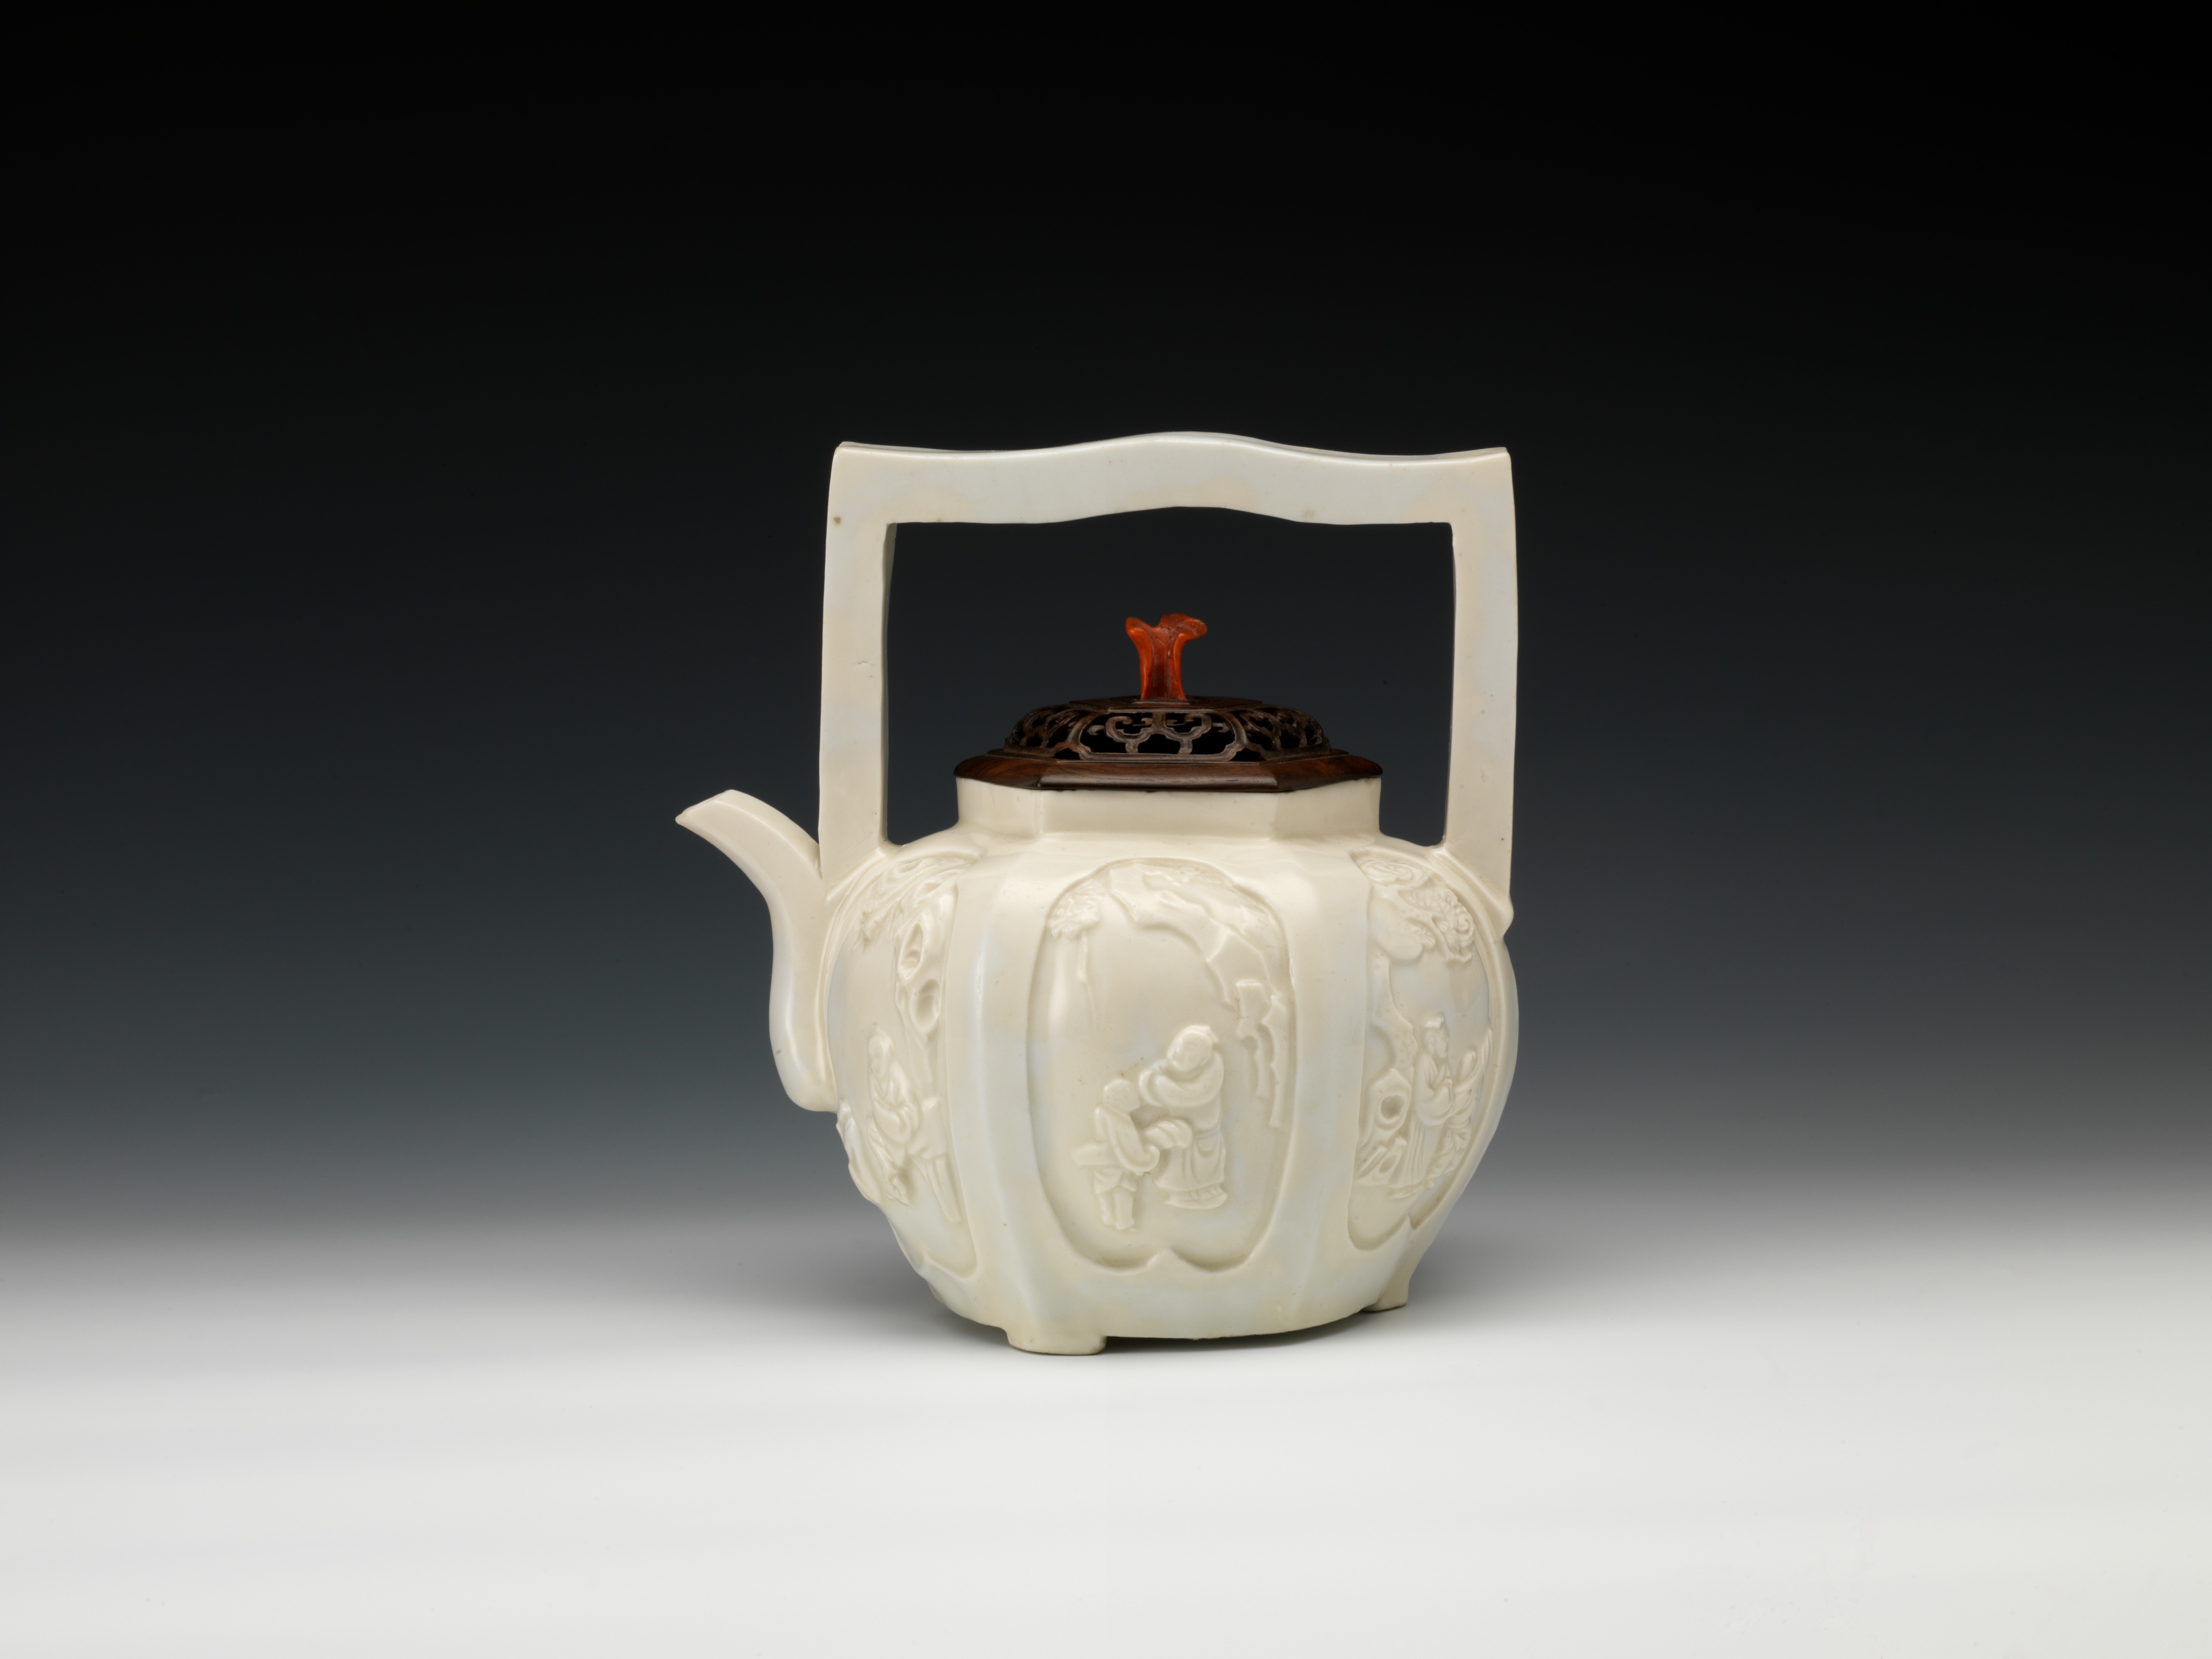 Teapot of six-lobed shape with overhead handle and moulded figure design inside reserved panels in white glaze, Dehua ware